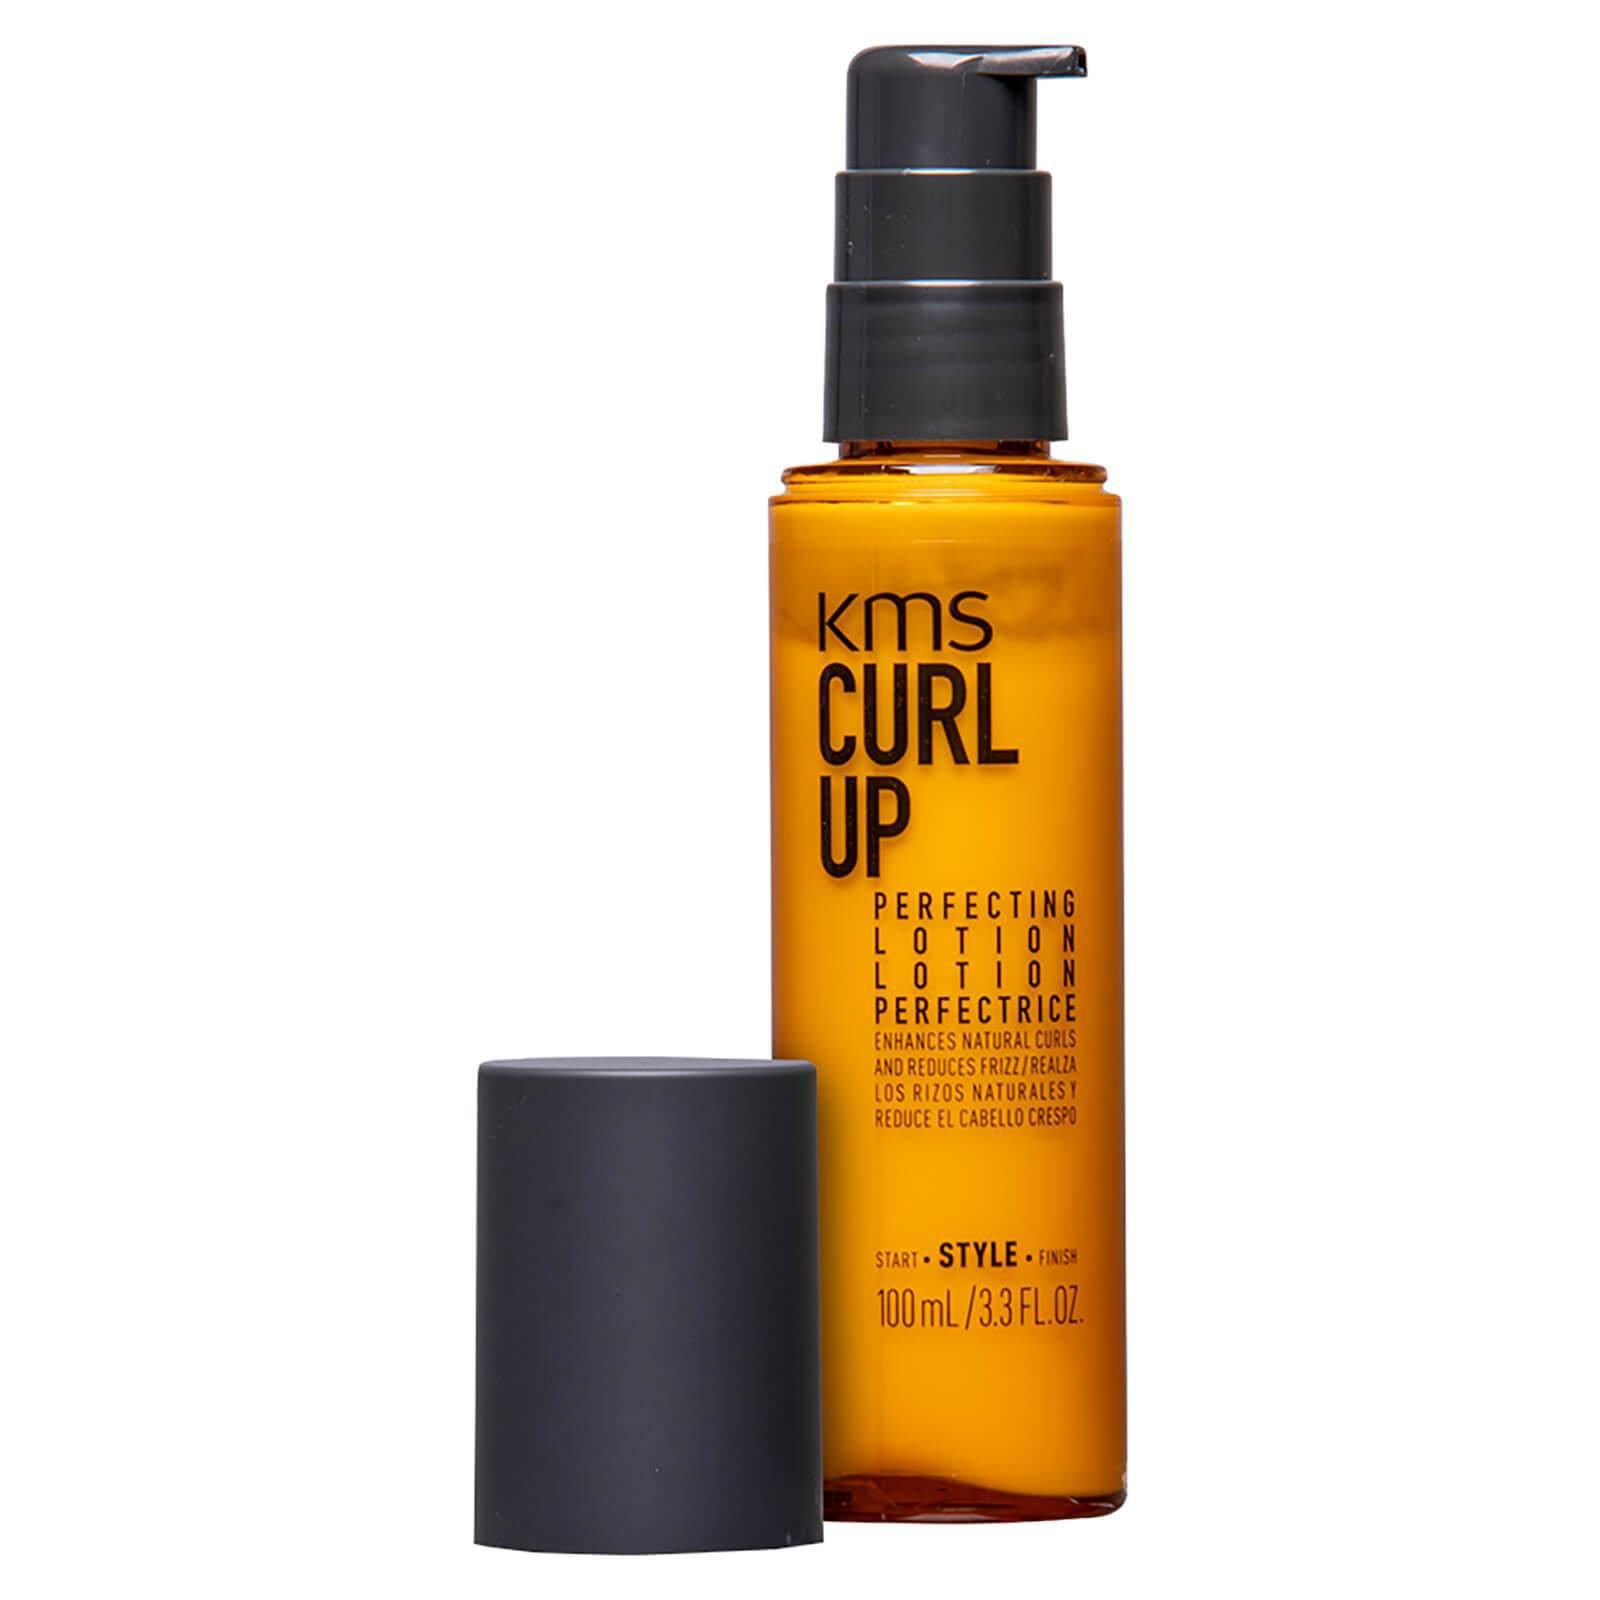 KMS CurlUp Perfecting Lotion 100ml - KMS